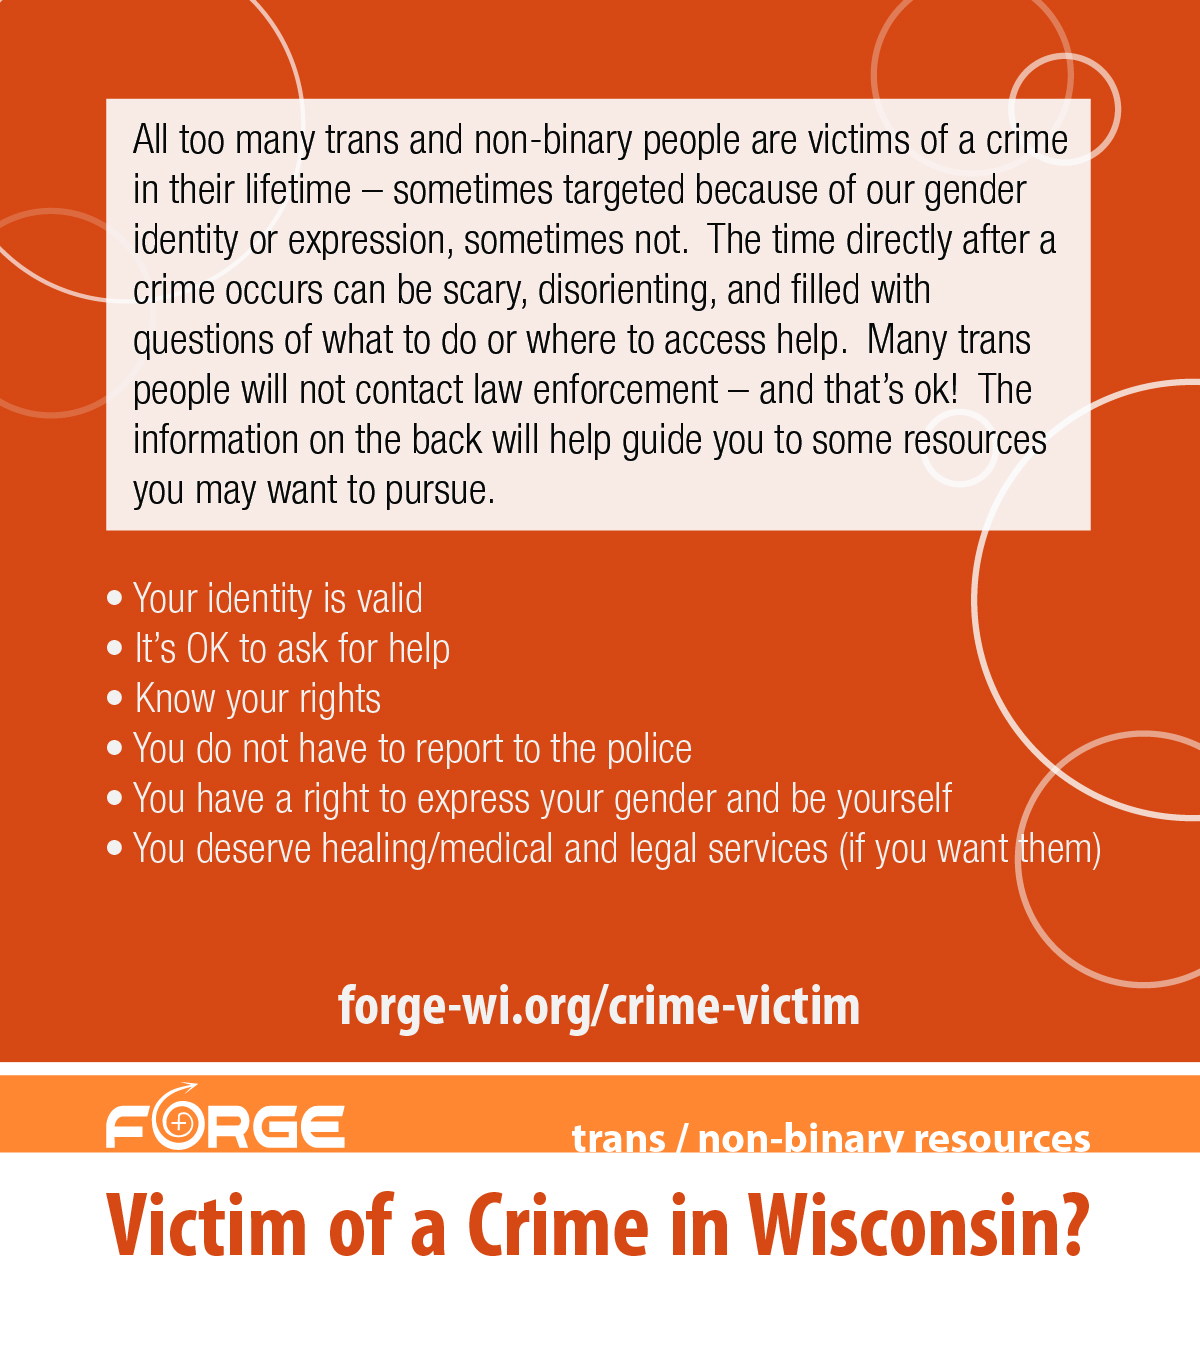 VOCA victims of crime palm card front